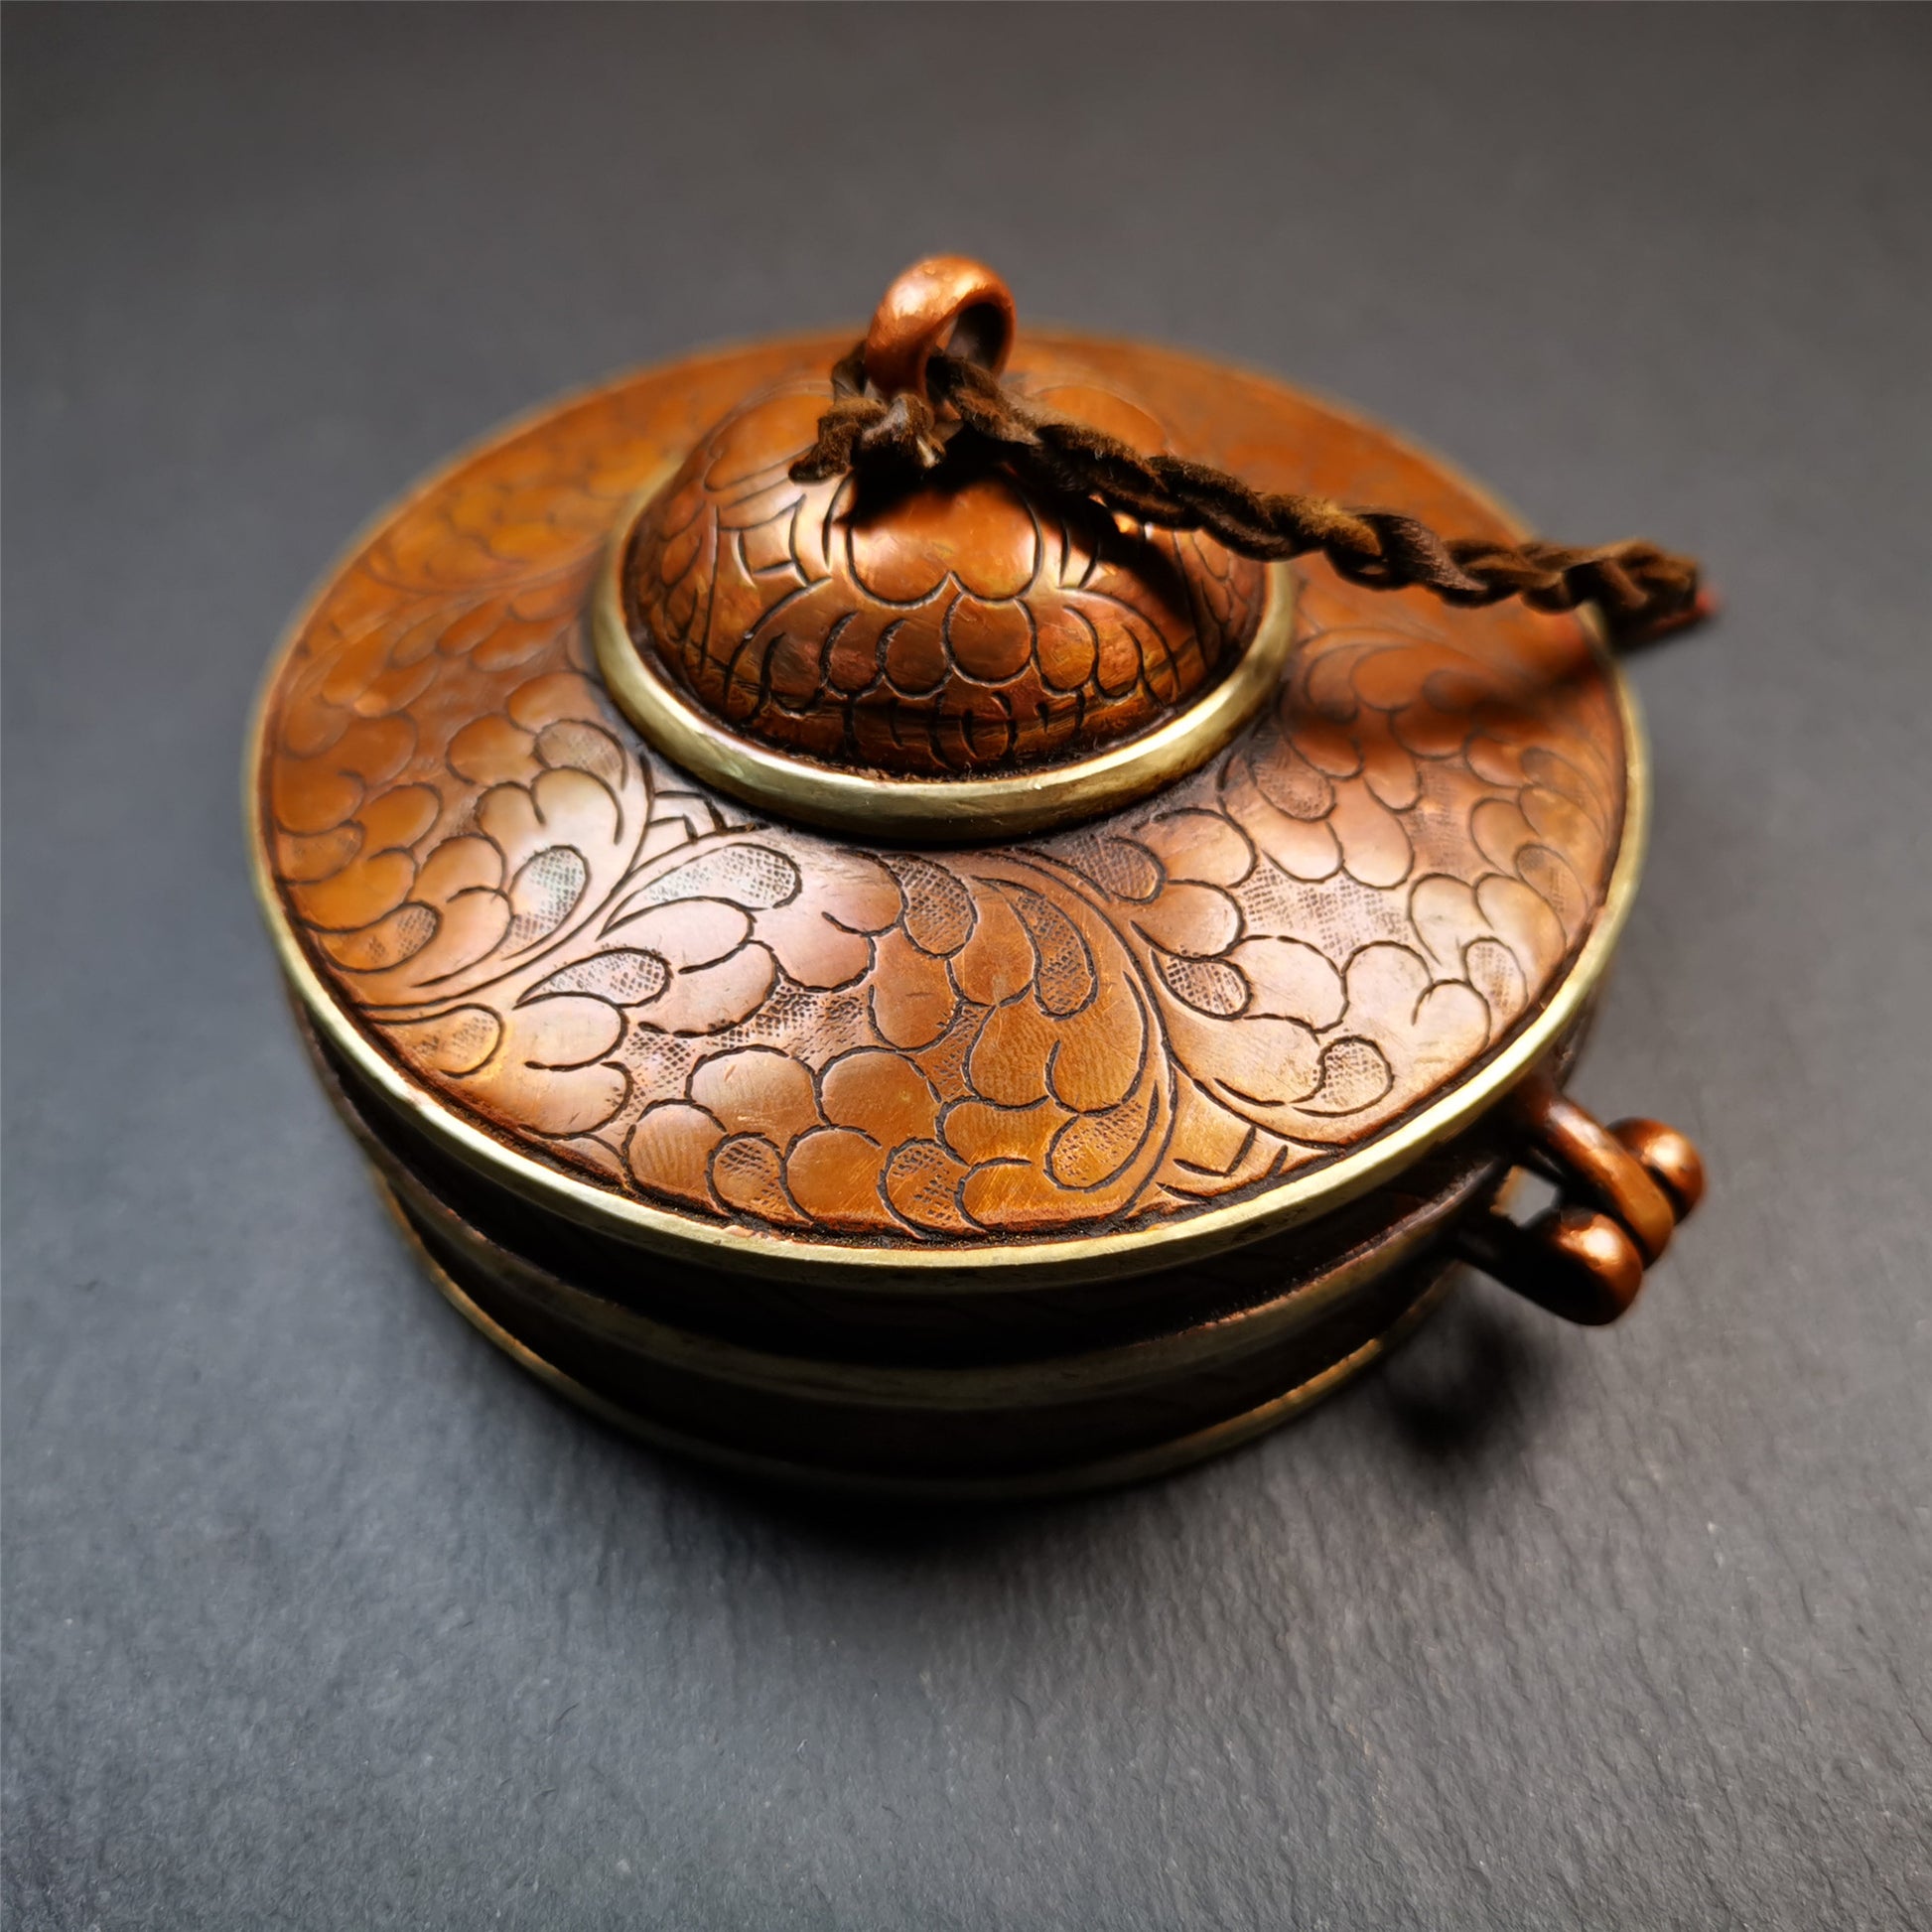 This tingsha case was handmade in Nepal,using traditional techniques and materials. It was made of copper and brass, 8.5-10.5cm diameter,carved mandala pattern,a cross vajra pattern at the bottom. Fit for 8-10cm Tingsha.